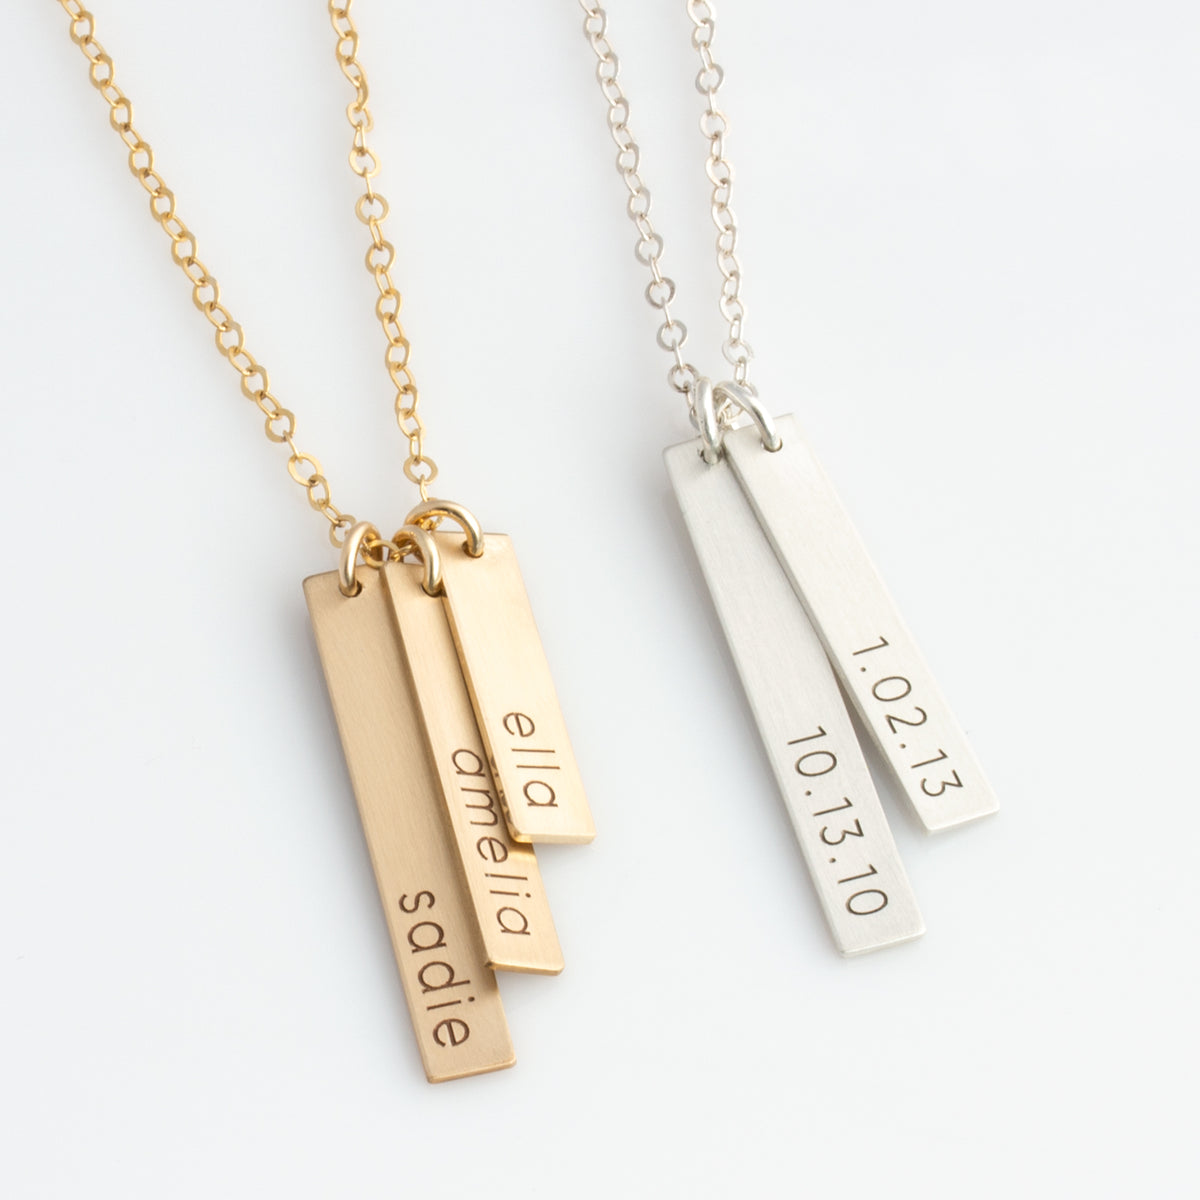 Layered Skinny Vertical Bars Necklace